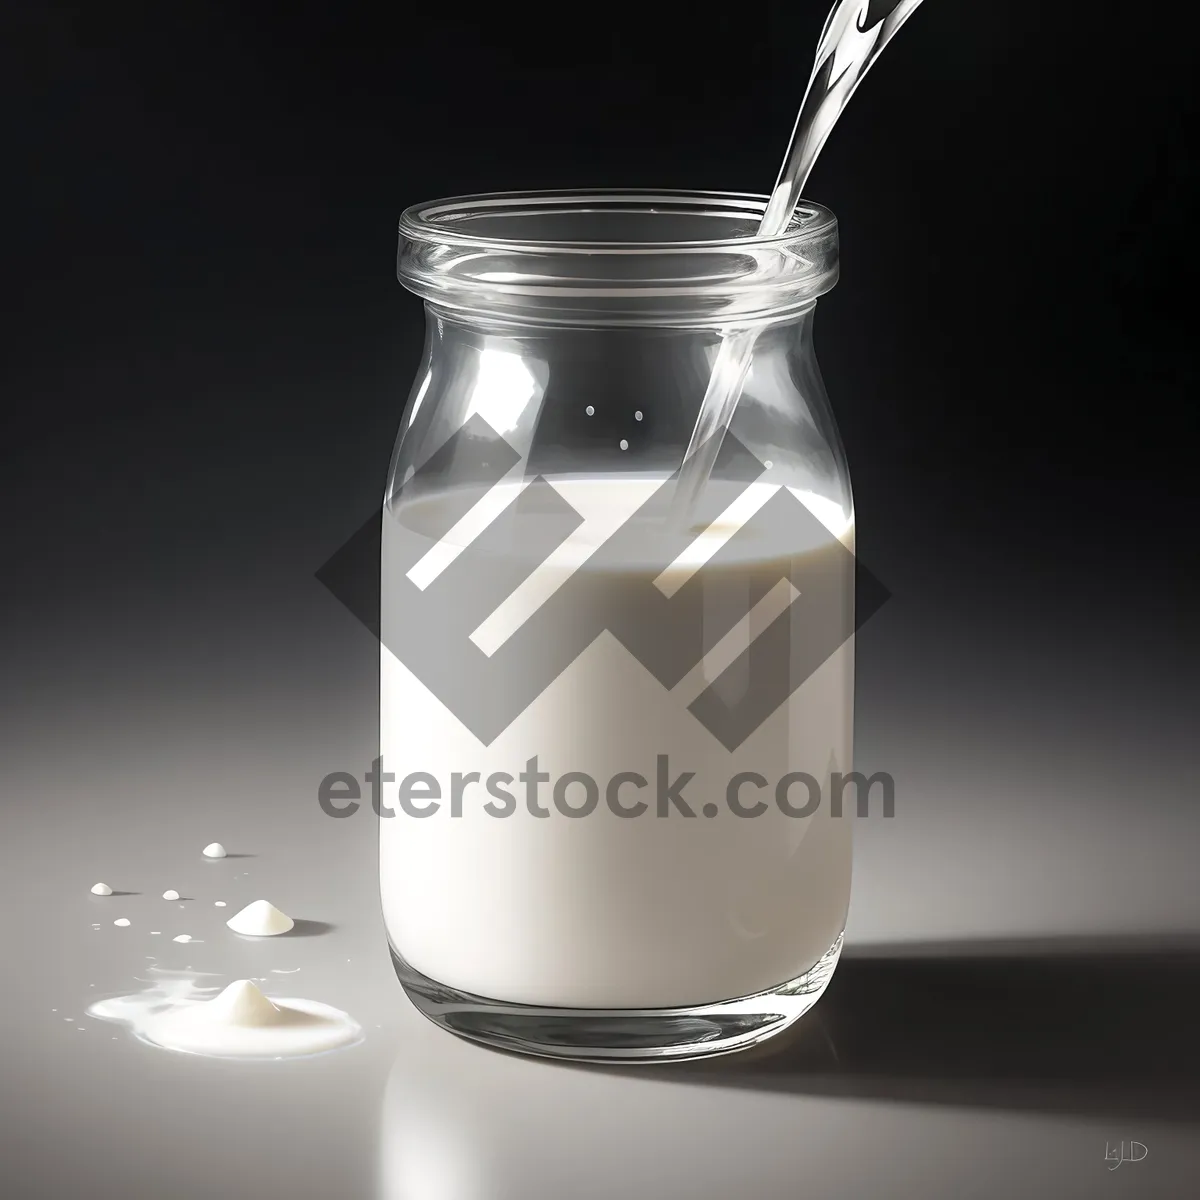 Picture of Refreshing Organic Milk in Glass Bottle